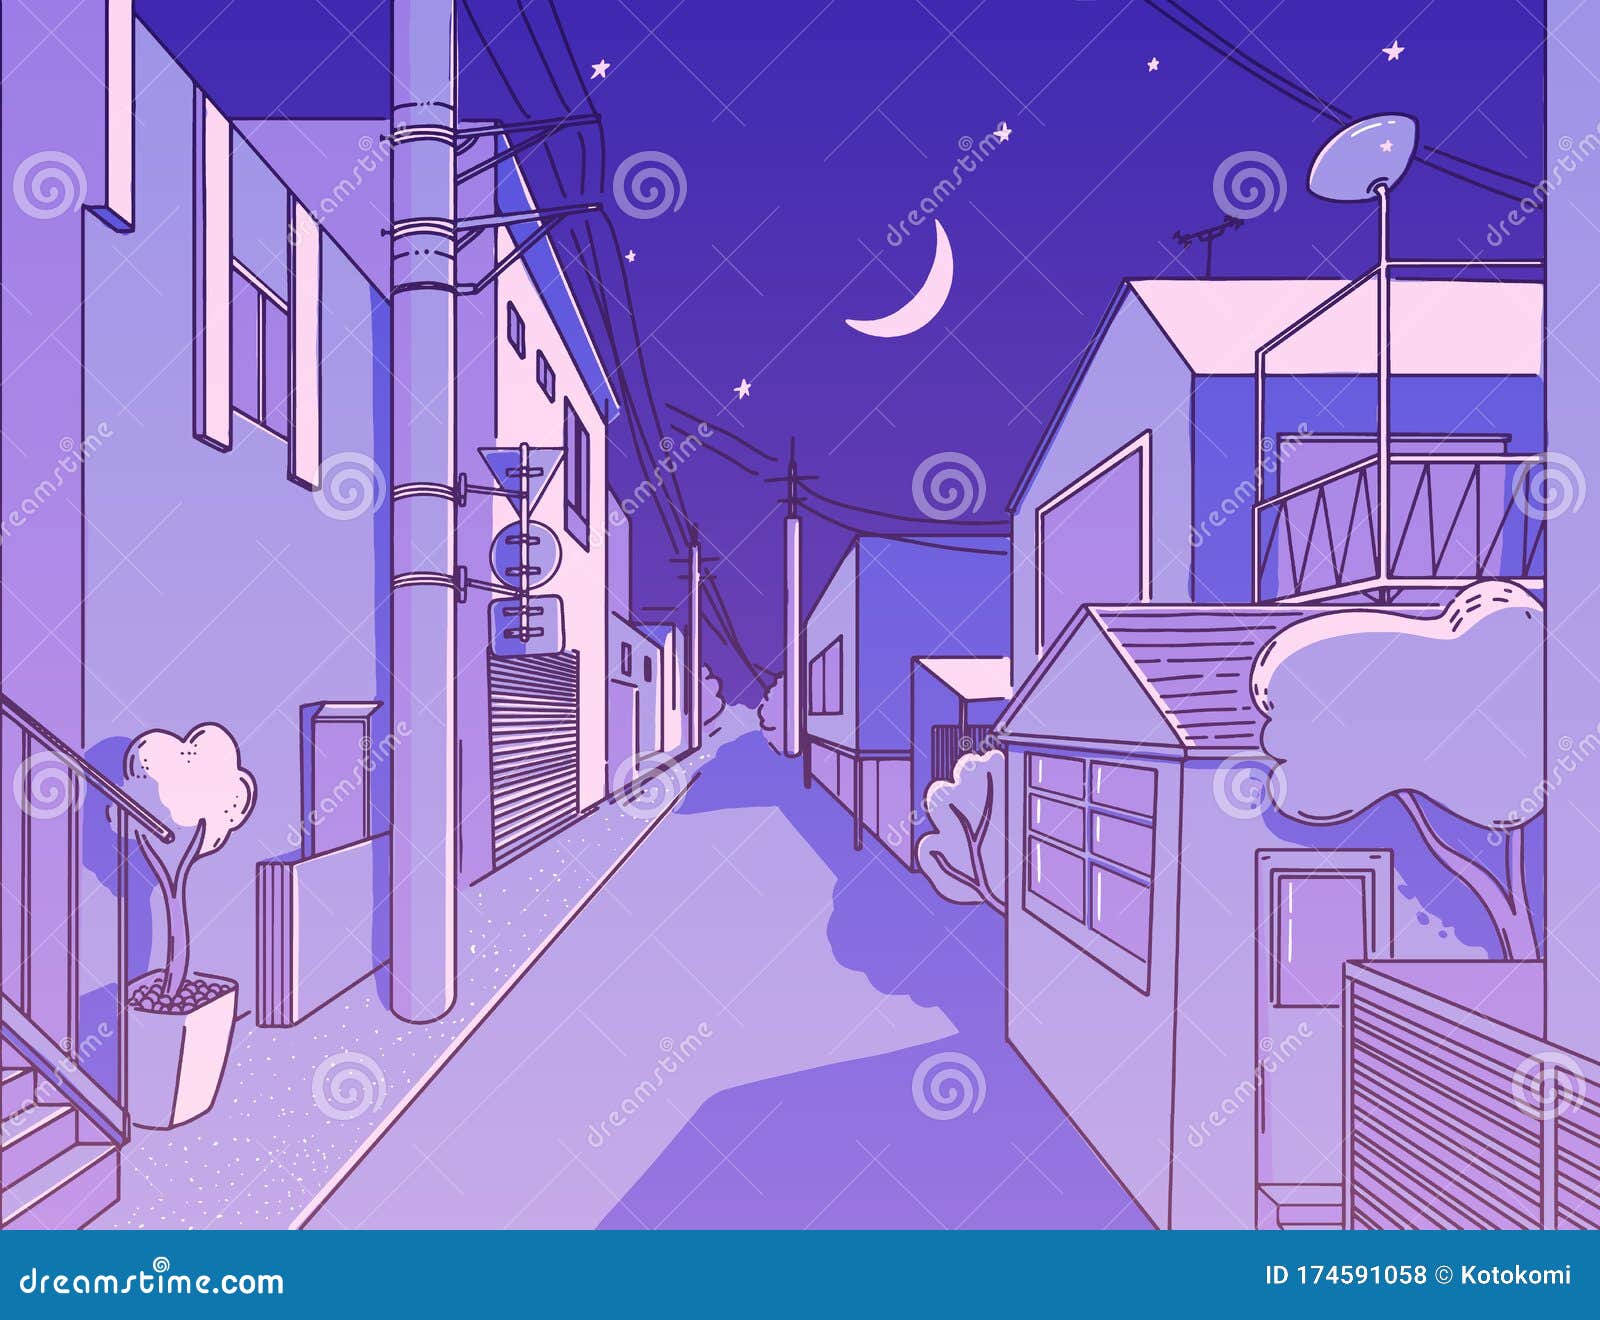 Night Asian Street In Residental Area Peaceful And Calm Alleyway Japanese Aesthetics Illustration Vector Landscape Stock Vector Illustration Of House Lane